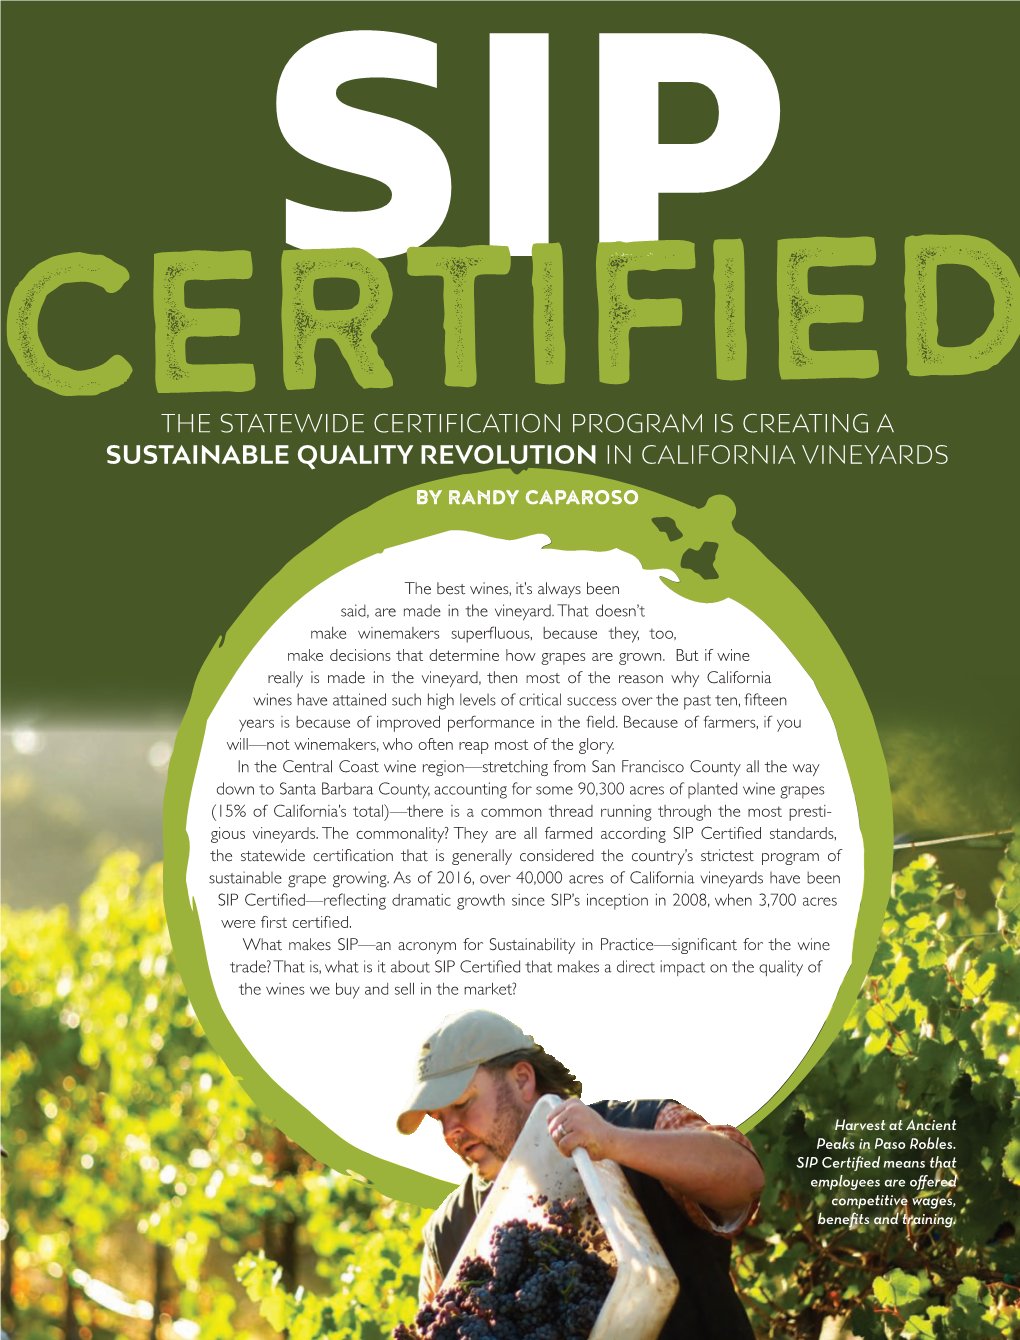 The Statewide Certification Program Is Creating a Sustainable Quality Revolution in California Vineyards by Randy Caparoso